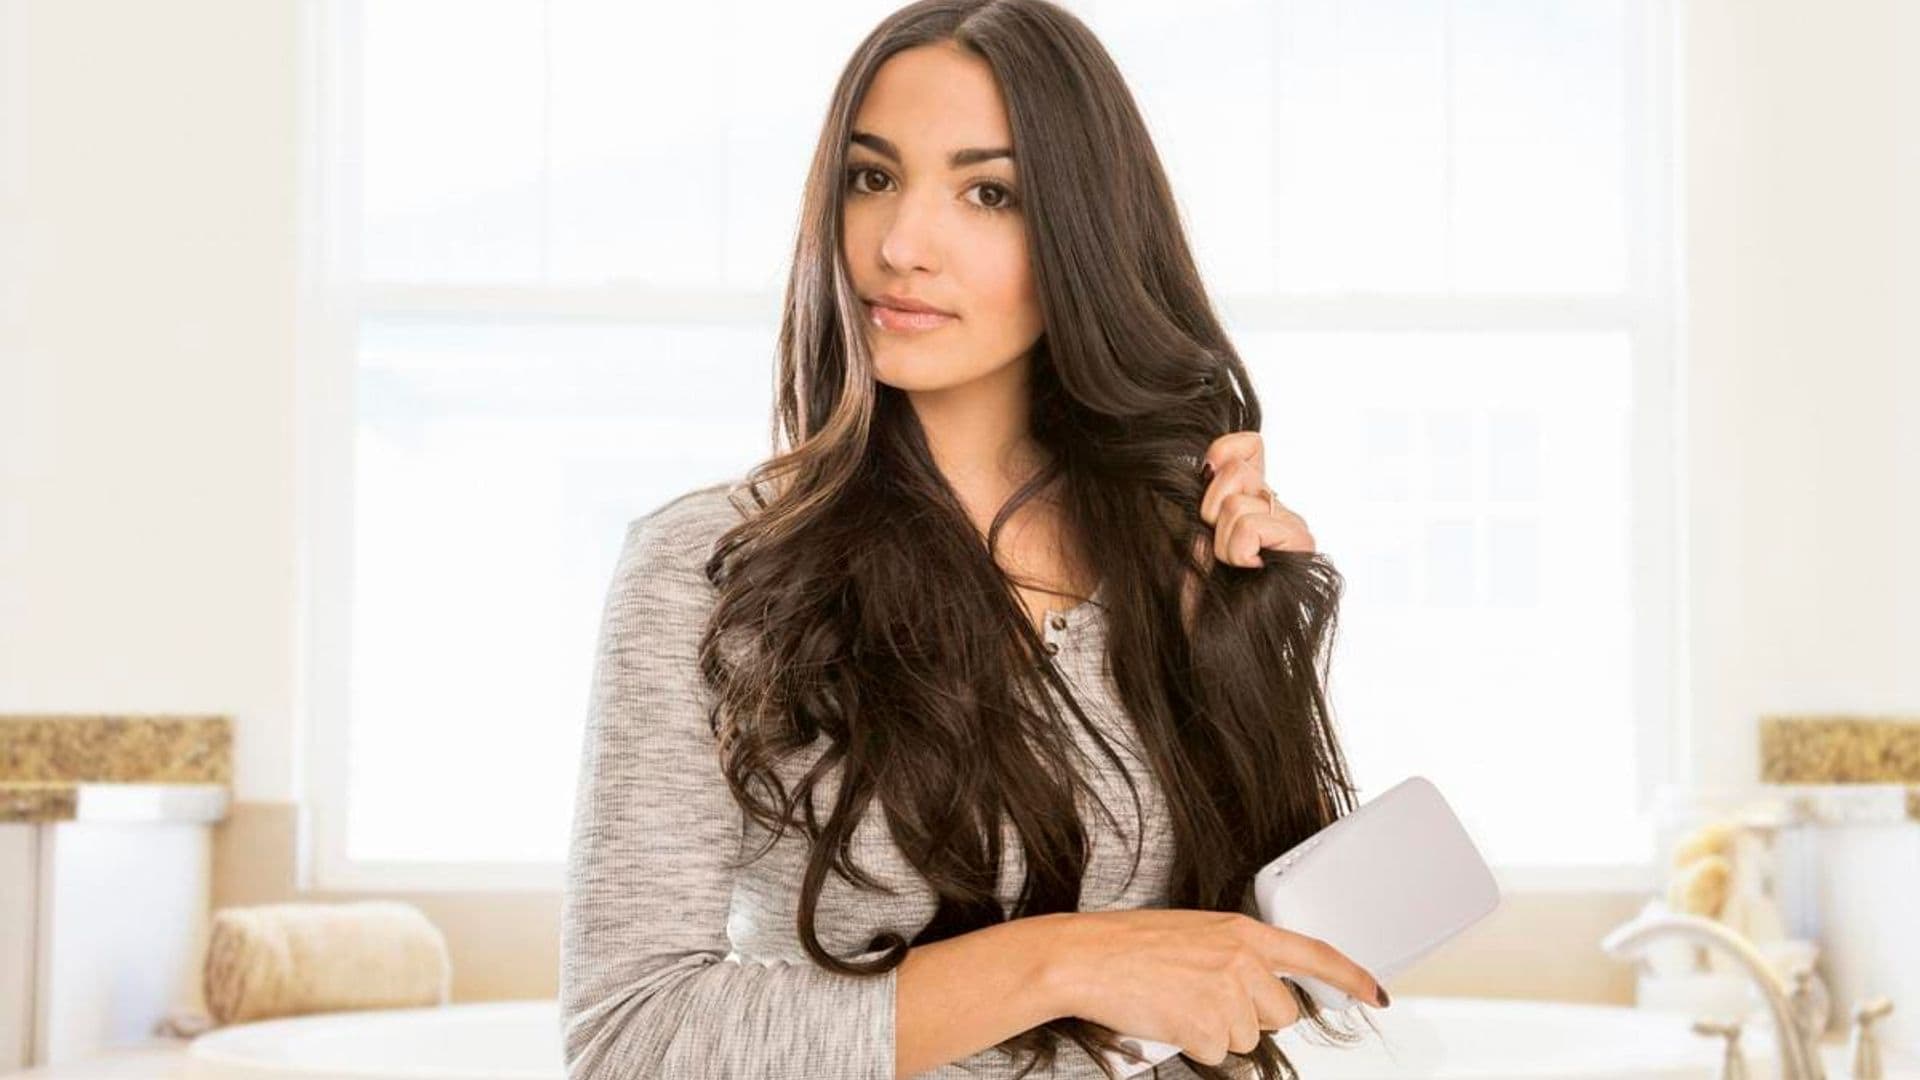 Survey reveals Latinas invest more money in hair care products than the average American woman